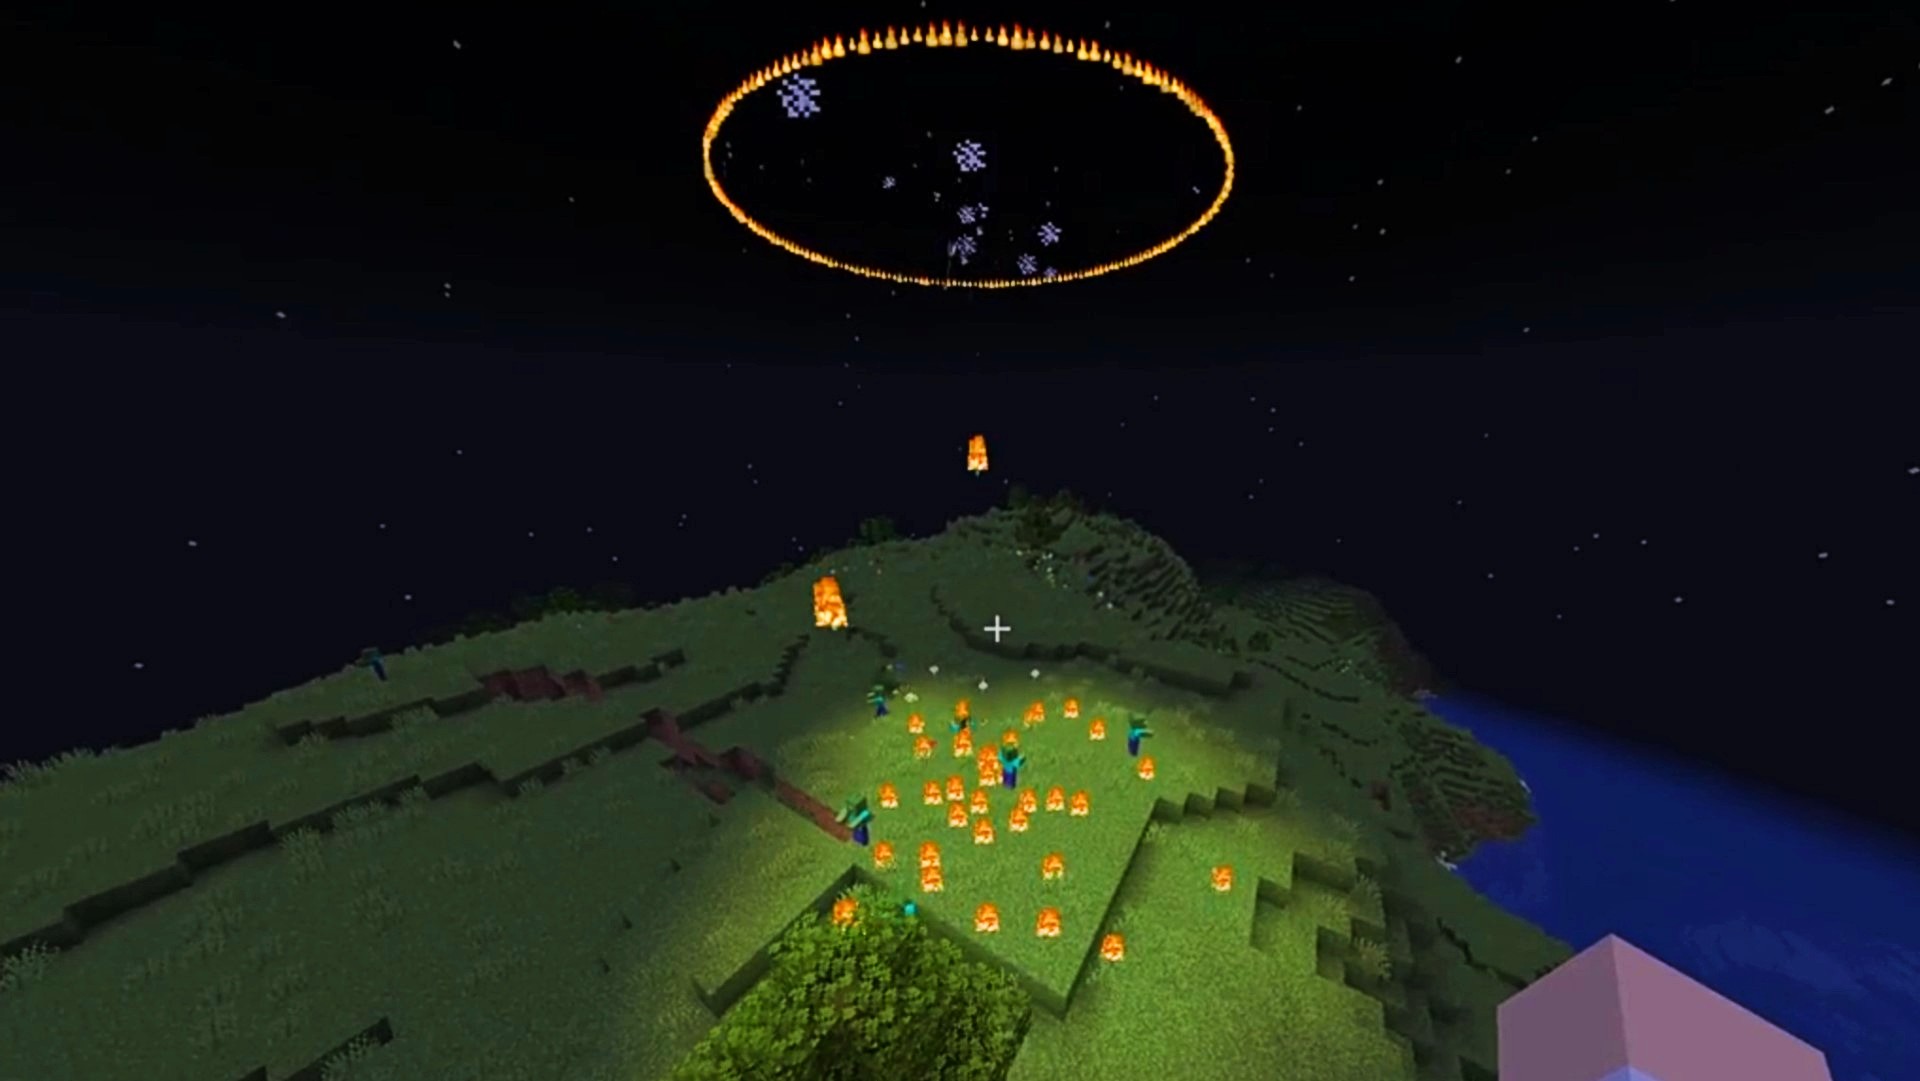 This Minecraft plugin aims to add powerful magic spells